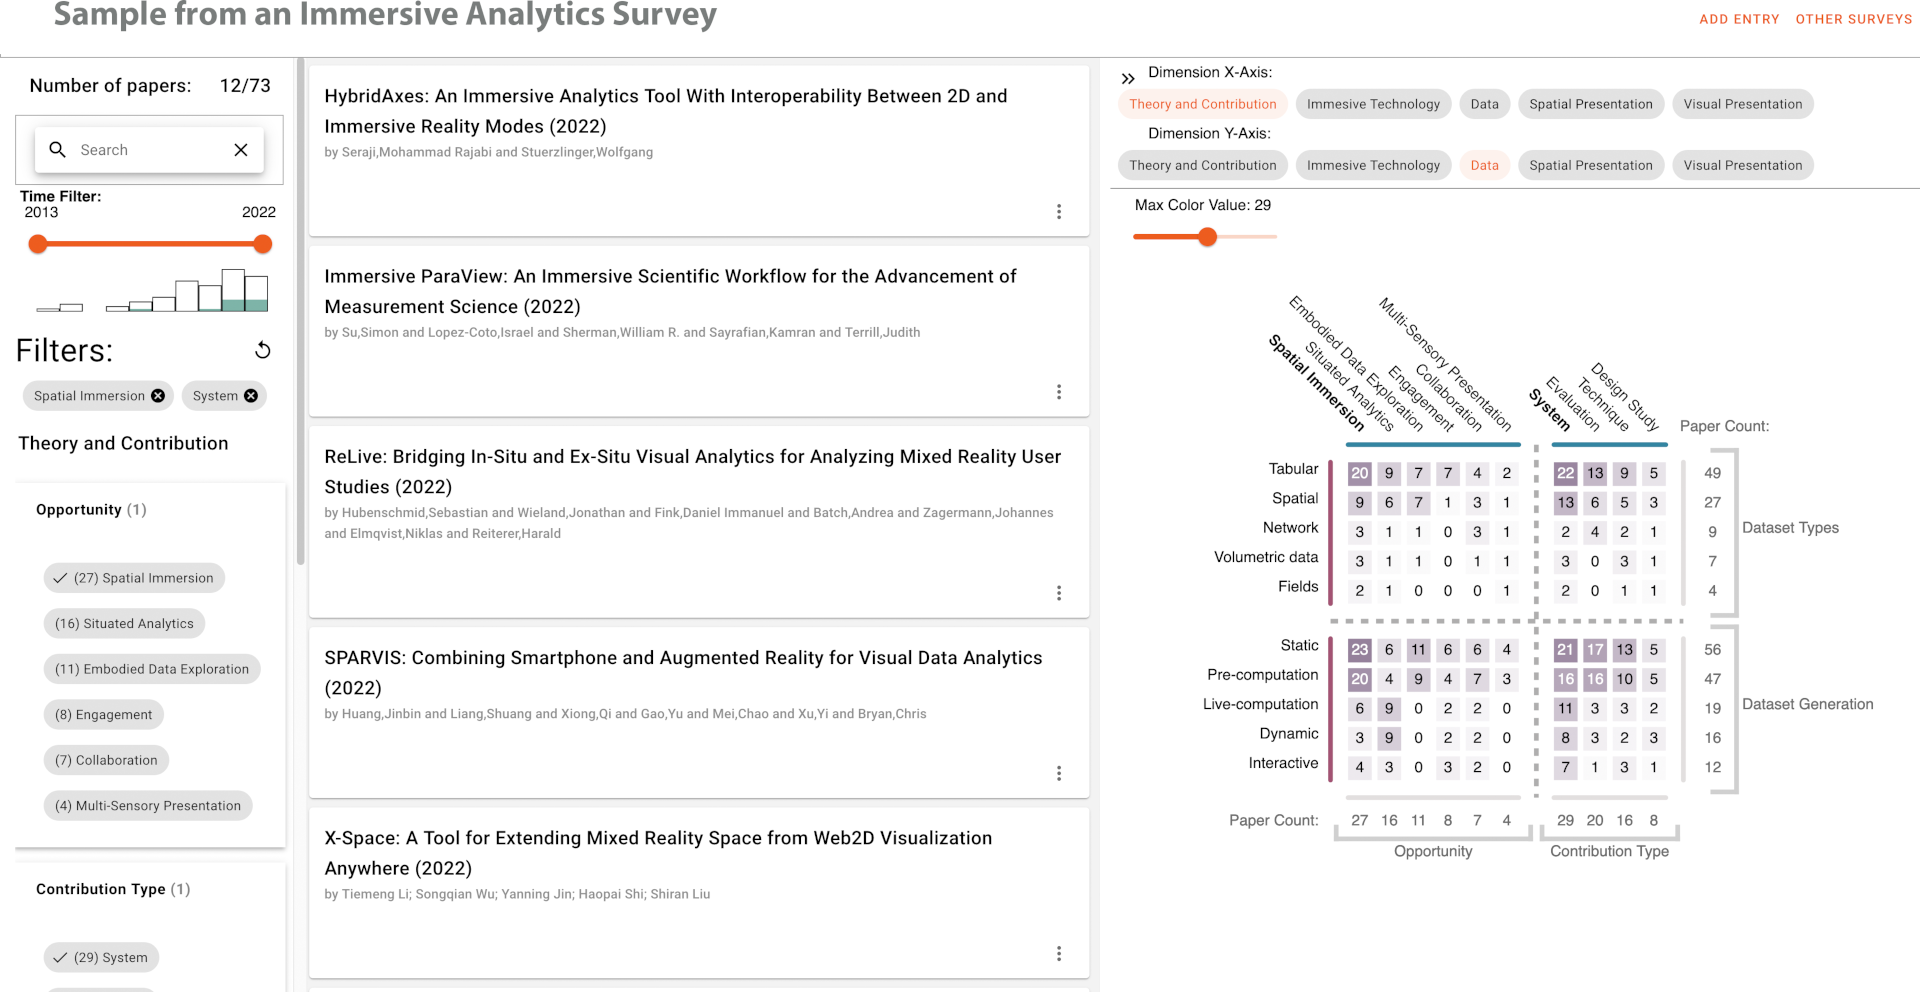 Screenshot of Indy Survey tool showing filter sliders, scented widgets, and other filter widgets on the left; a list of papers in the middle; and an adjacency matrix on the right.